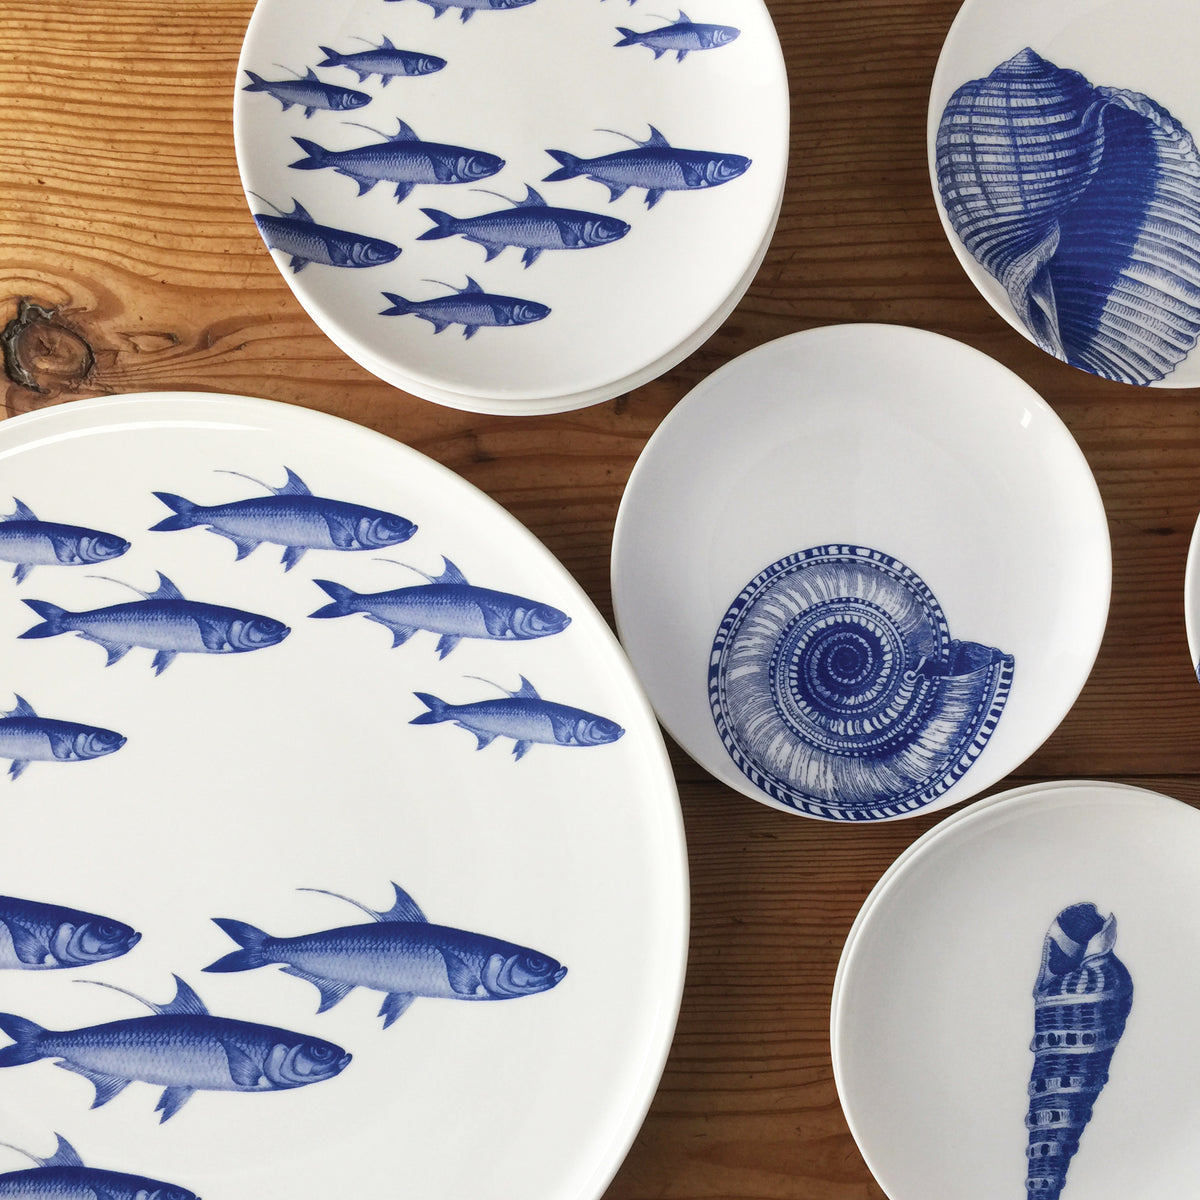 A collection of heirloom-quality dinnerware featuring blue fish and shell designs is displayed on a wooden surface. The Caskata Artisanal Home School of Fish Small Plates are expertly arranged, showcasing their intricate and captivating patterns.